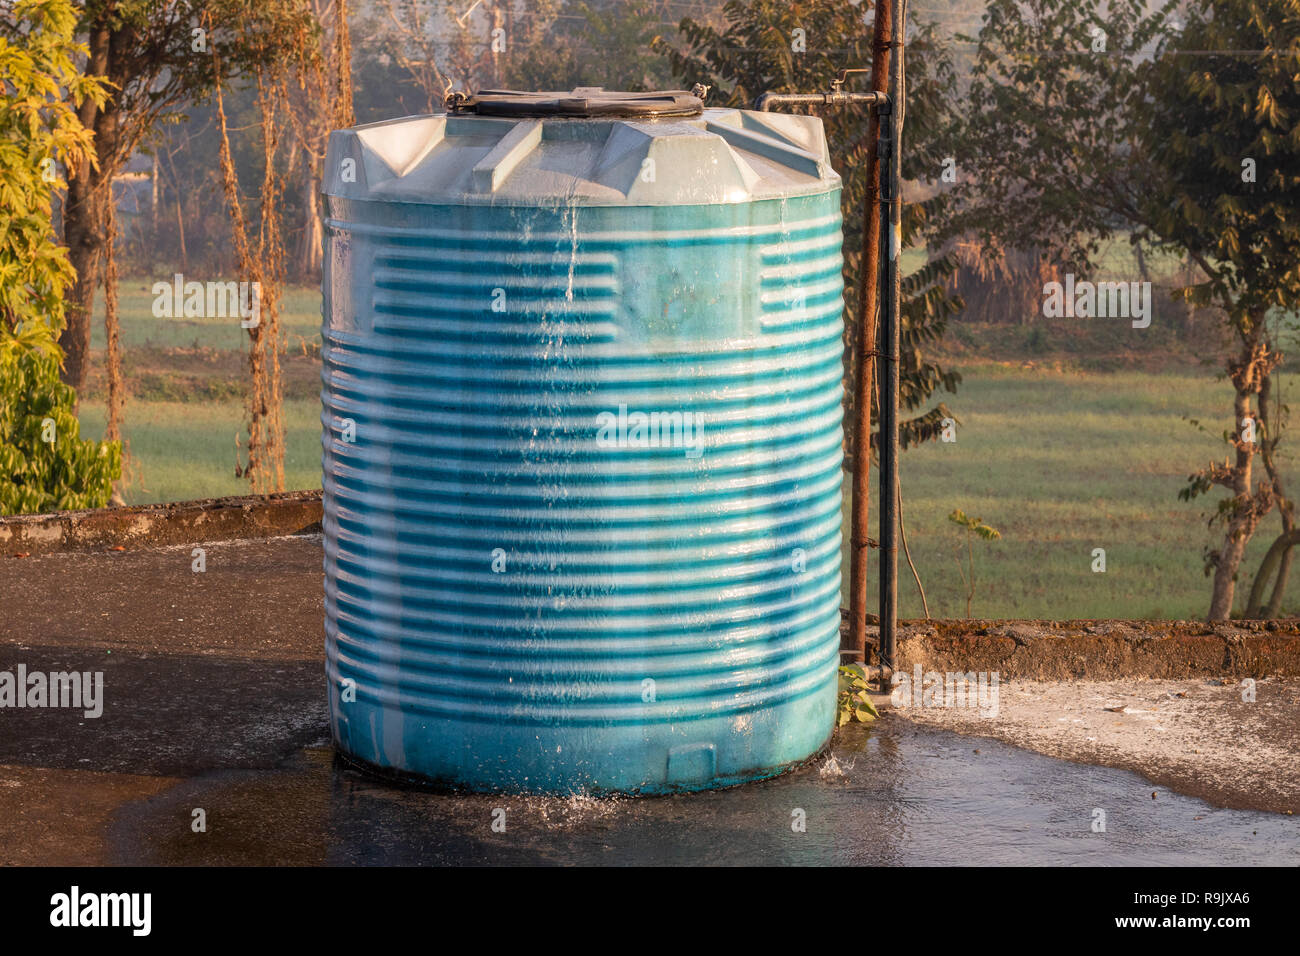 Water tank overflowing, wasting water Stock Photo